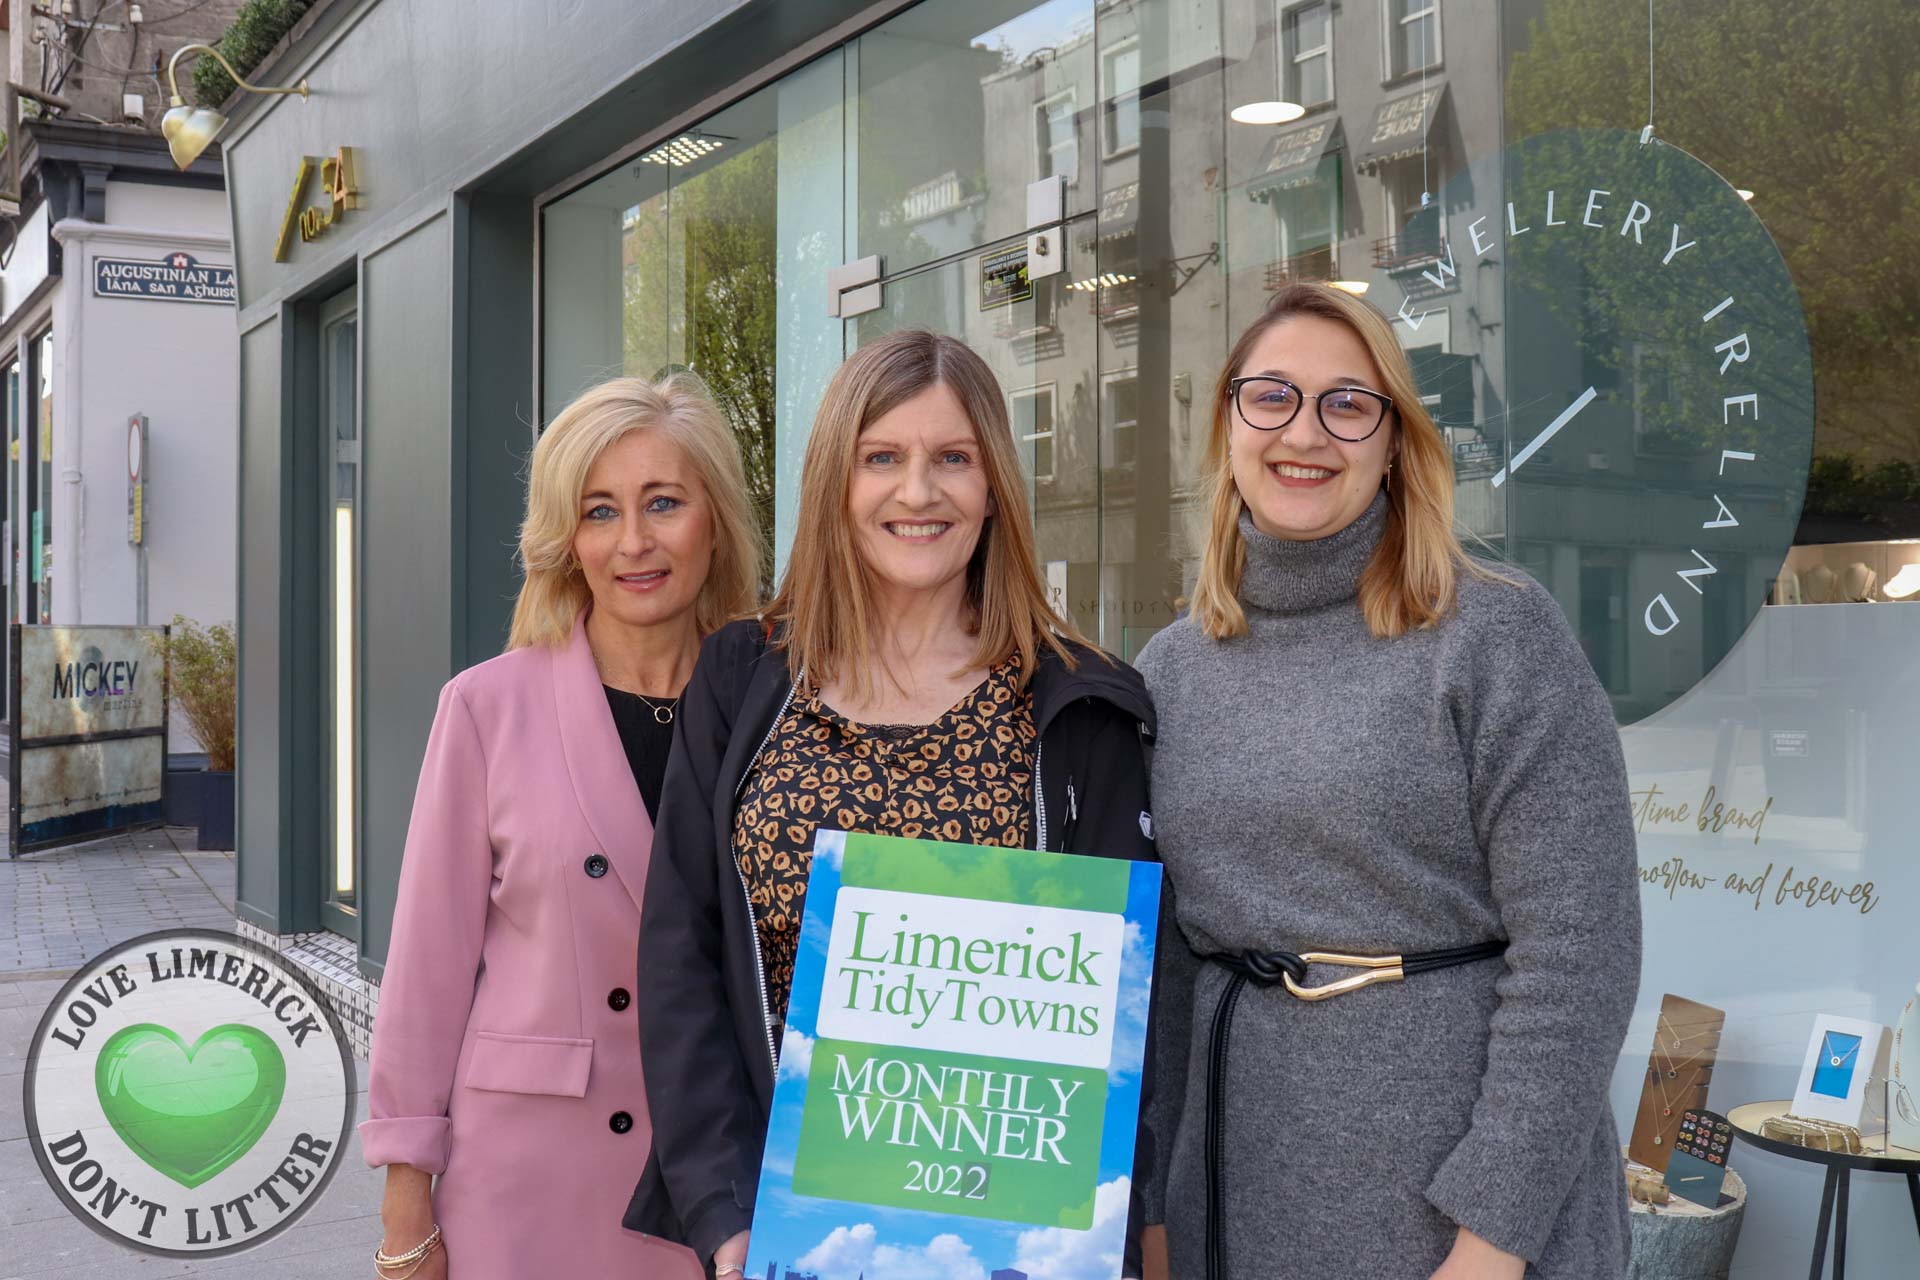 Seoidín Jewellers, 54 Thomas Street have been announced as the April Limerick Tidy Towns winners for April 2022. Pictured are manager Deirdre Naughton, Maura O'Neill, Limerick Tidy Towns and shop assistant Laura Freitas. Picture: Ava O'Donoghue/ilovelimerick